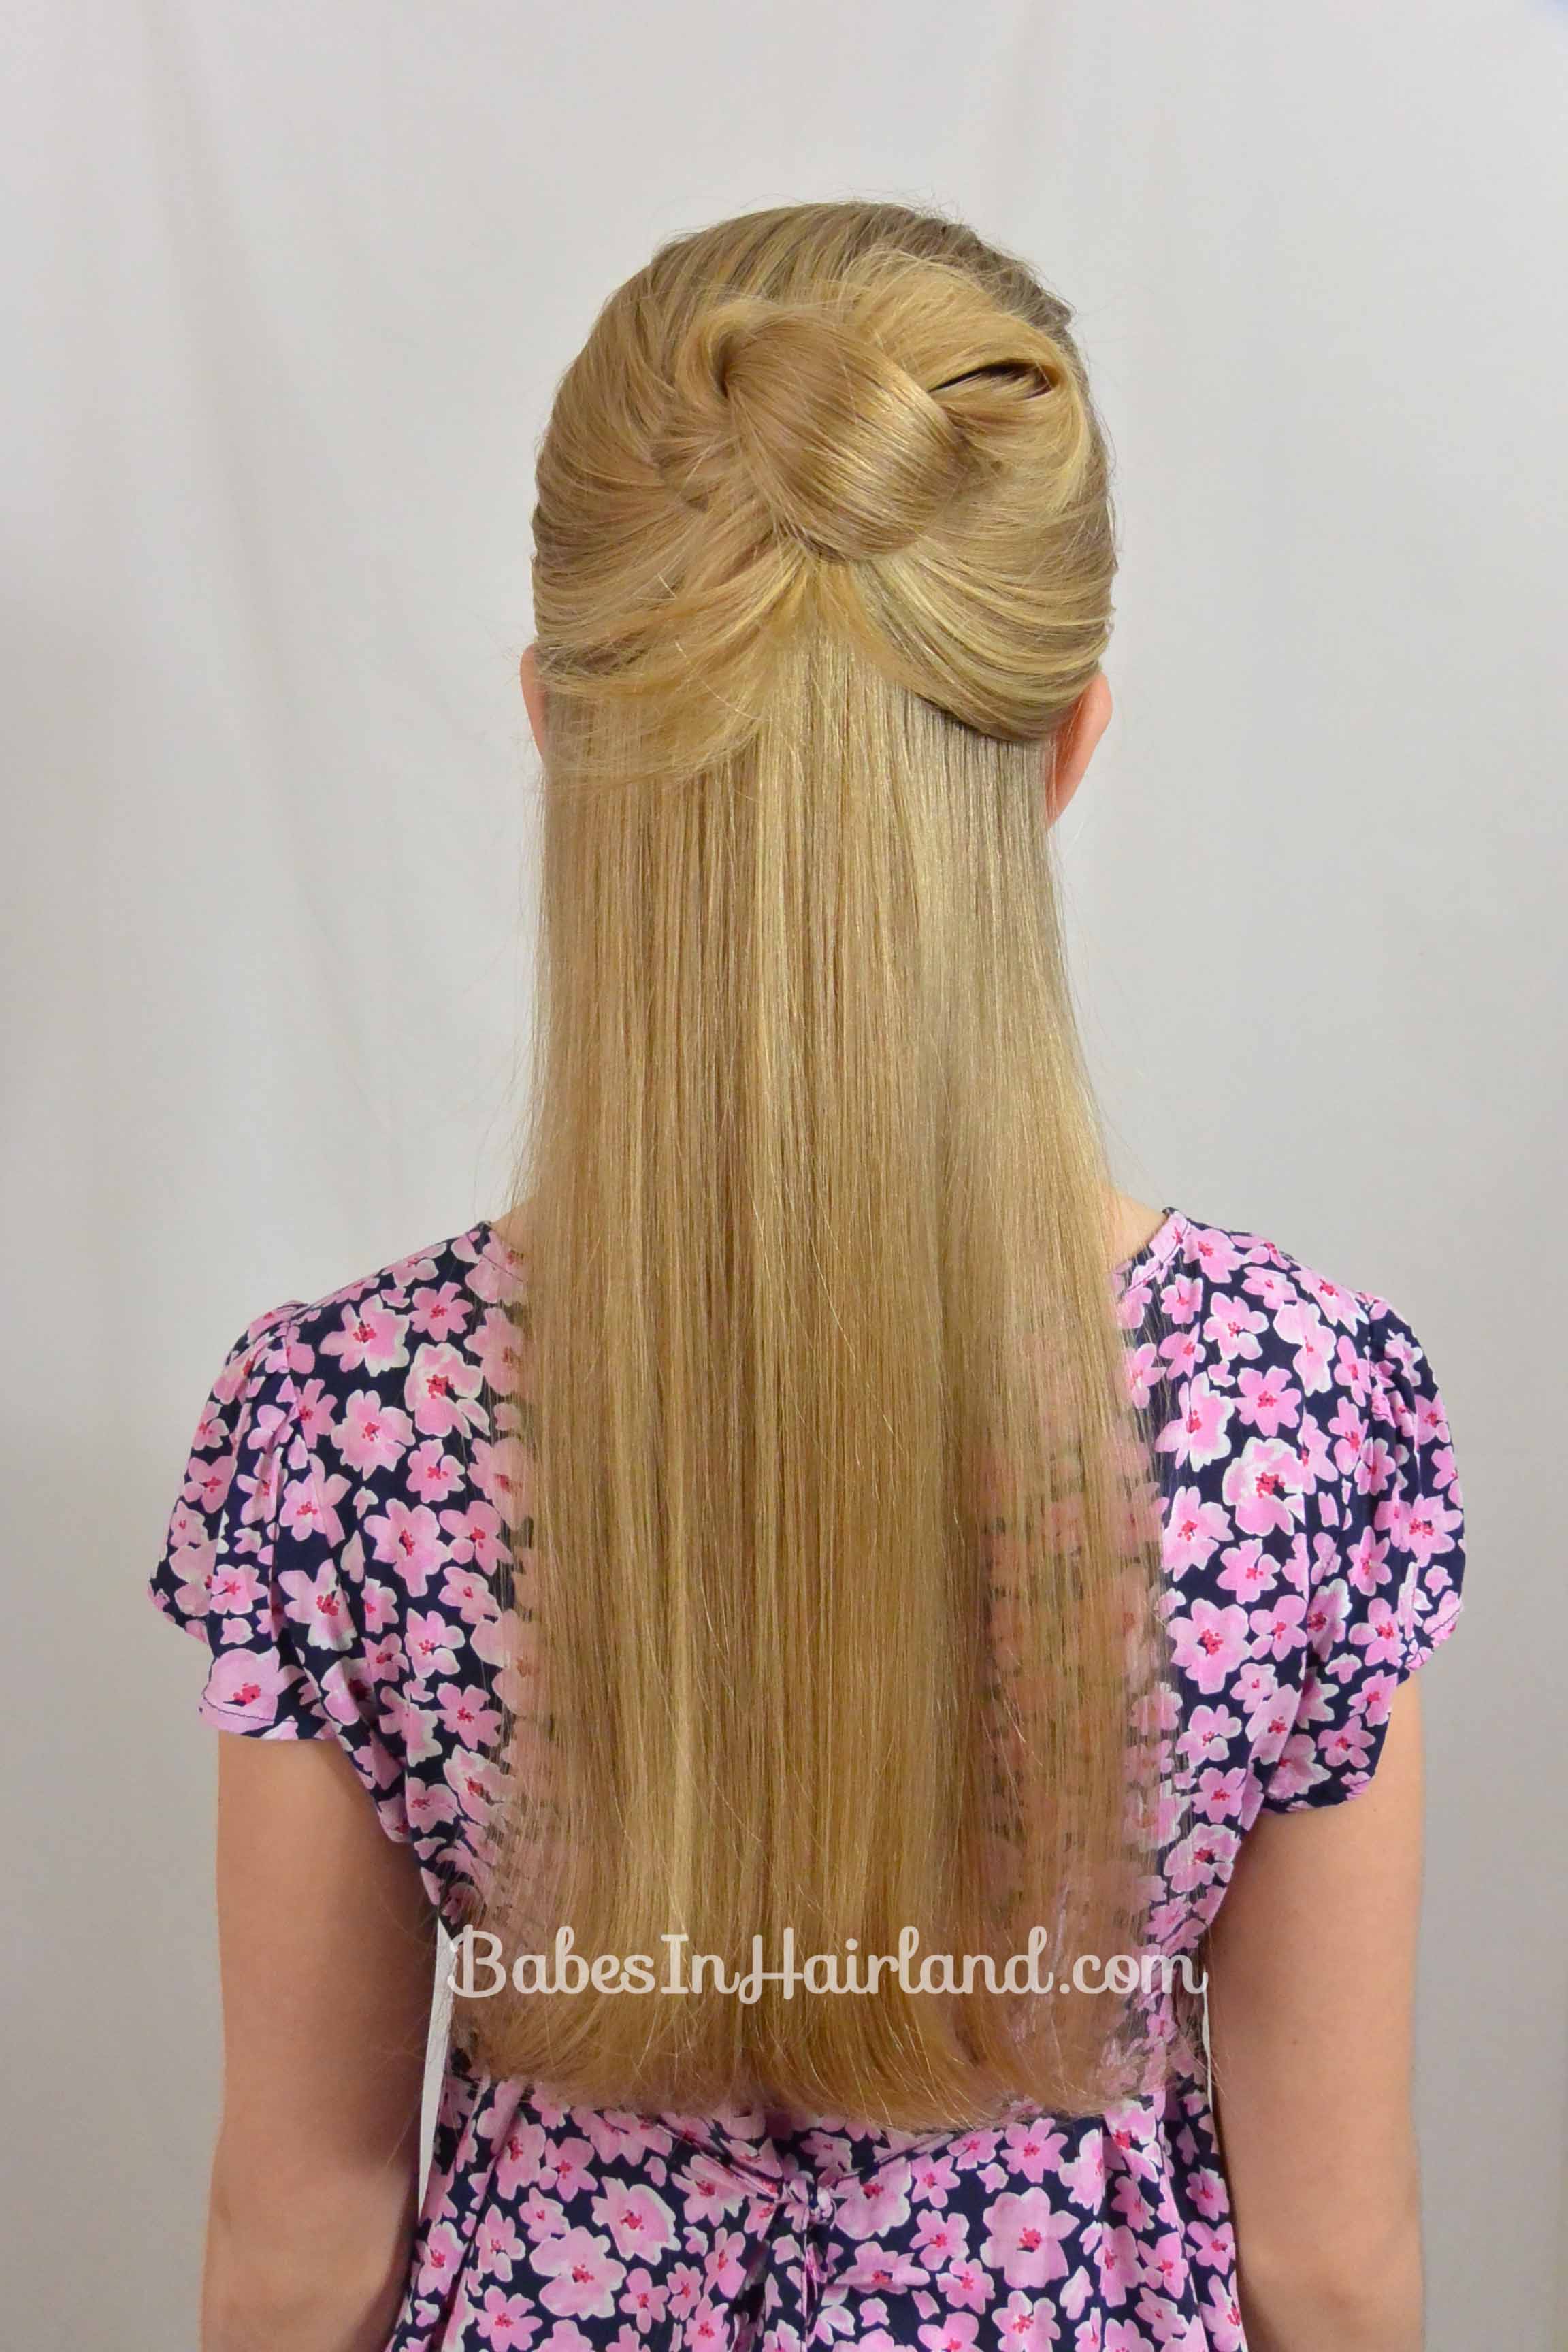 Easy 1 Minute Knotted Hairstyle - Babes In Hairland